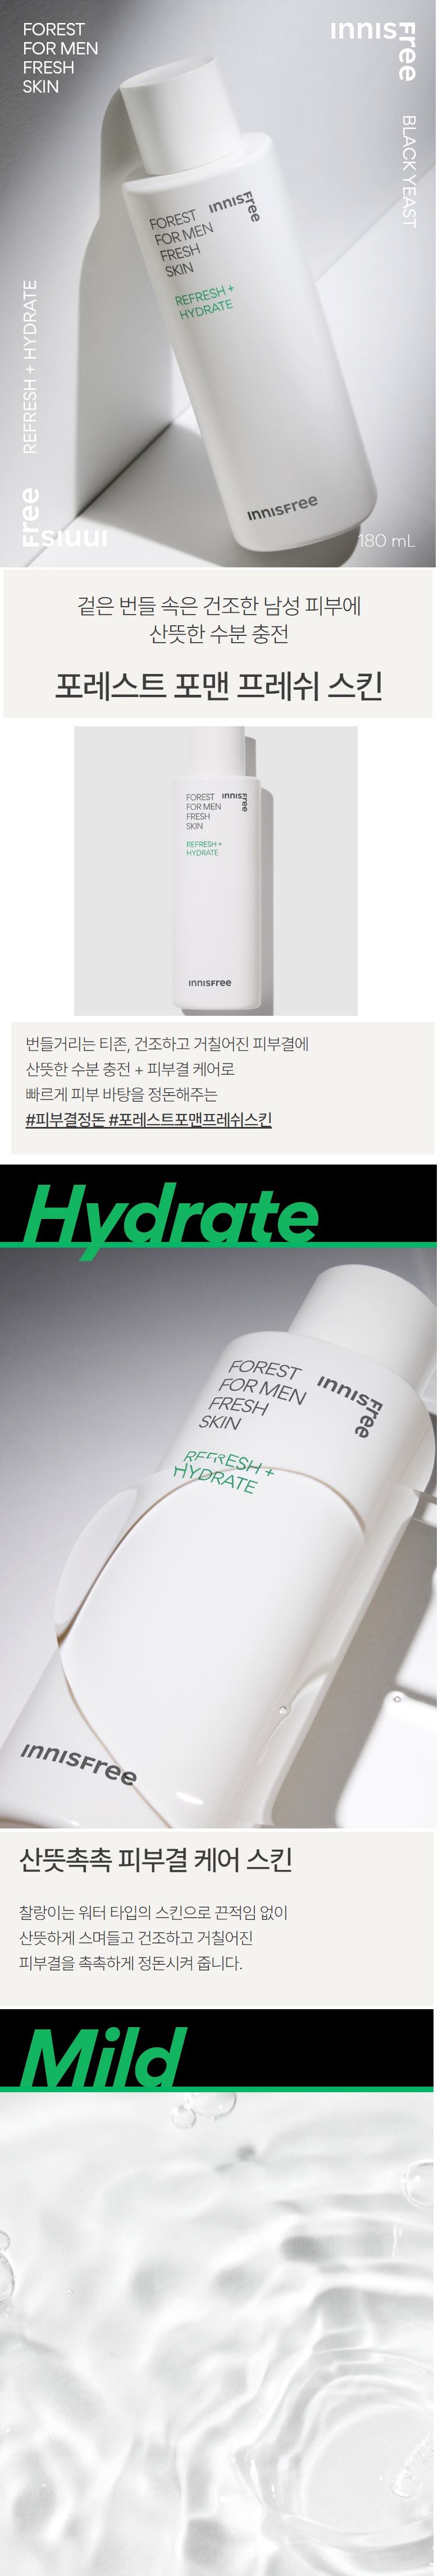 Innisfree Forest For Men Fresh Skin korean skincare product online shop malaysia china poland1